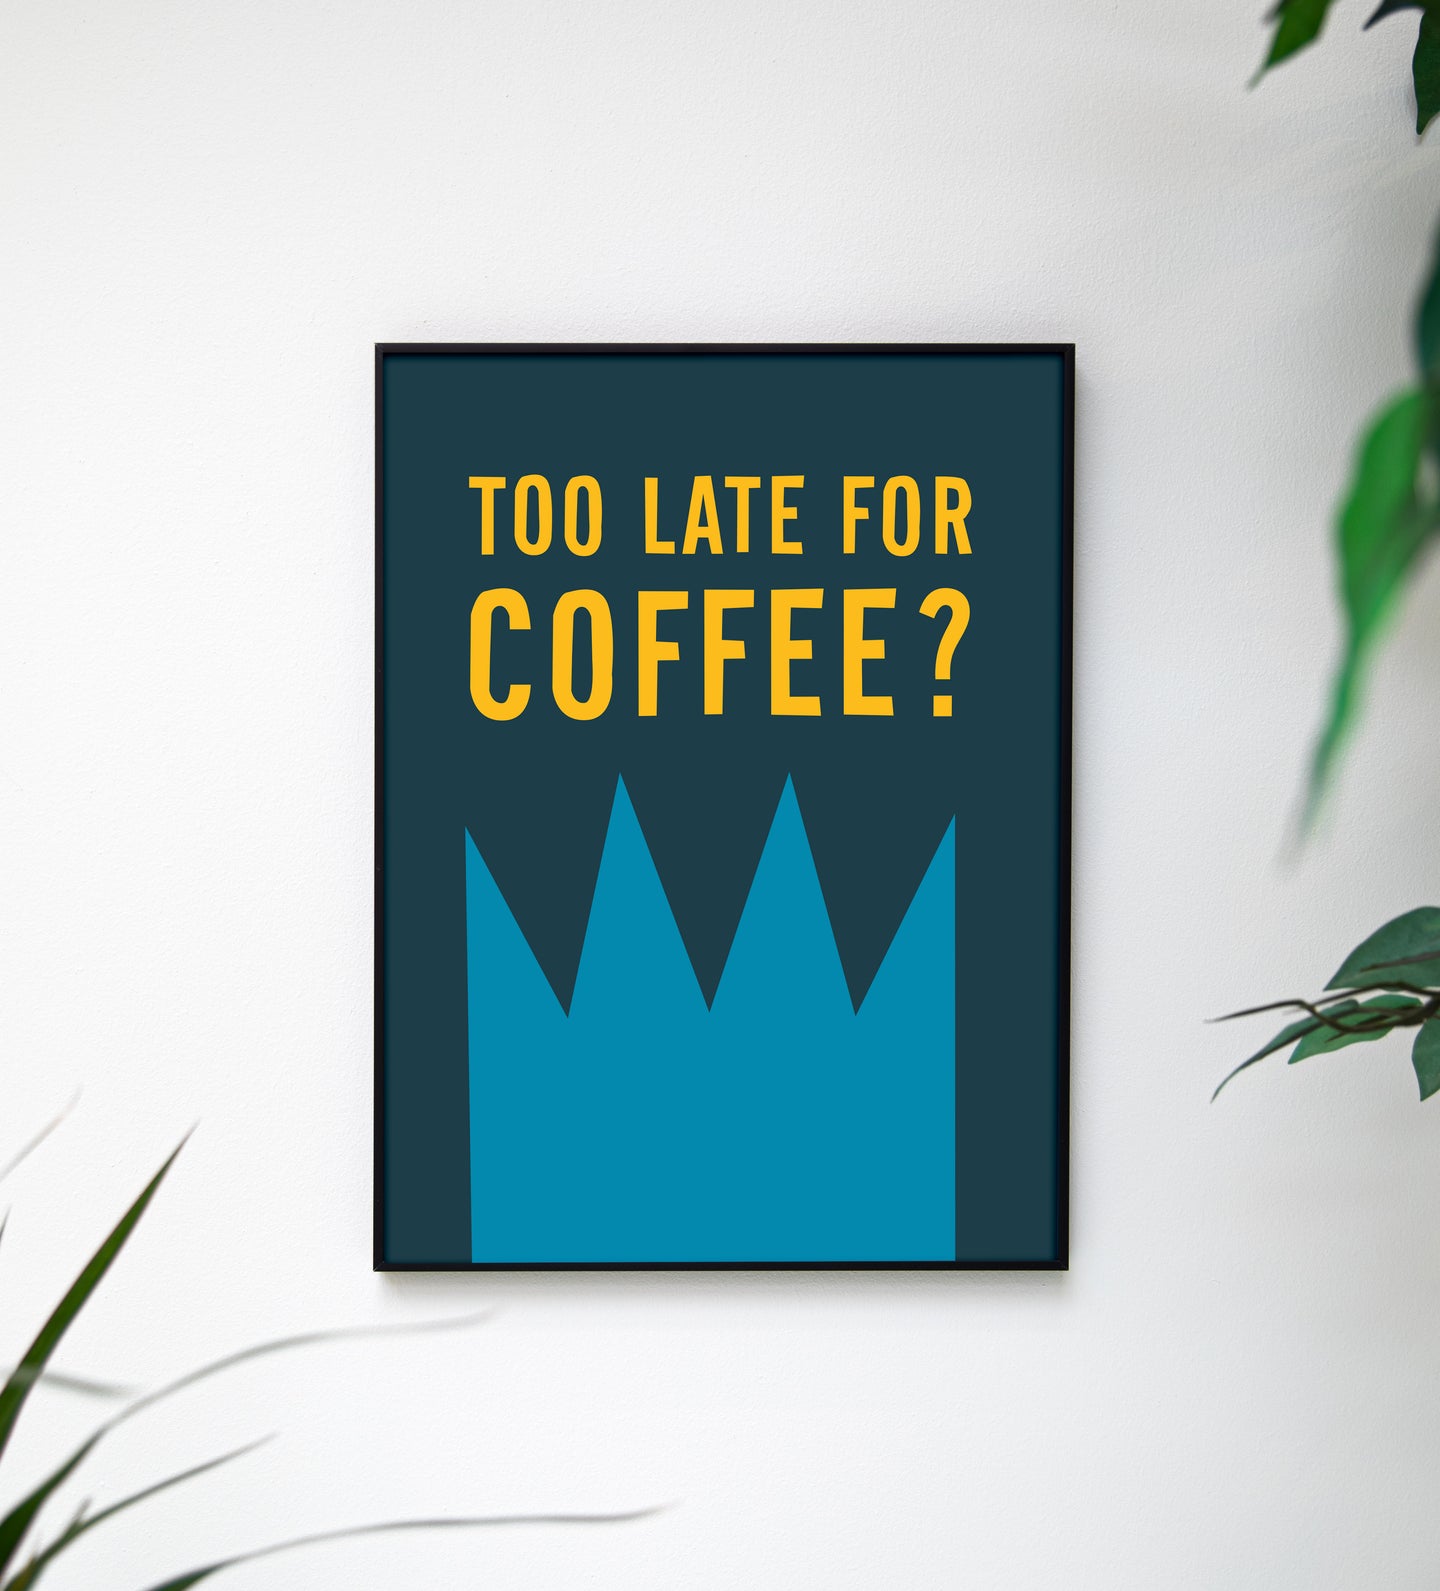 Too late for coffee?